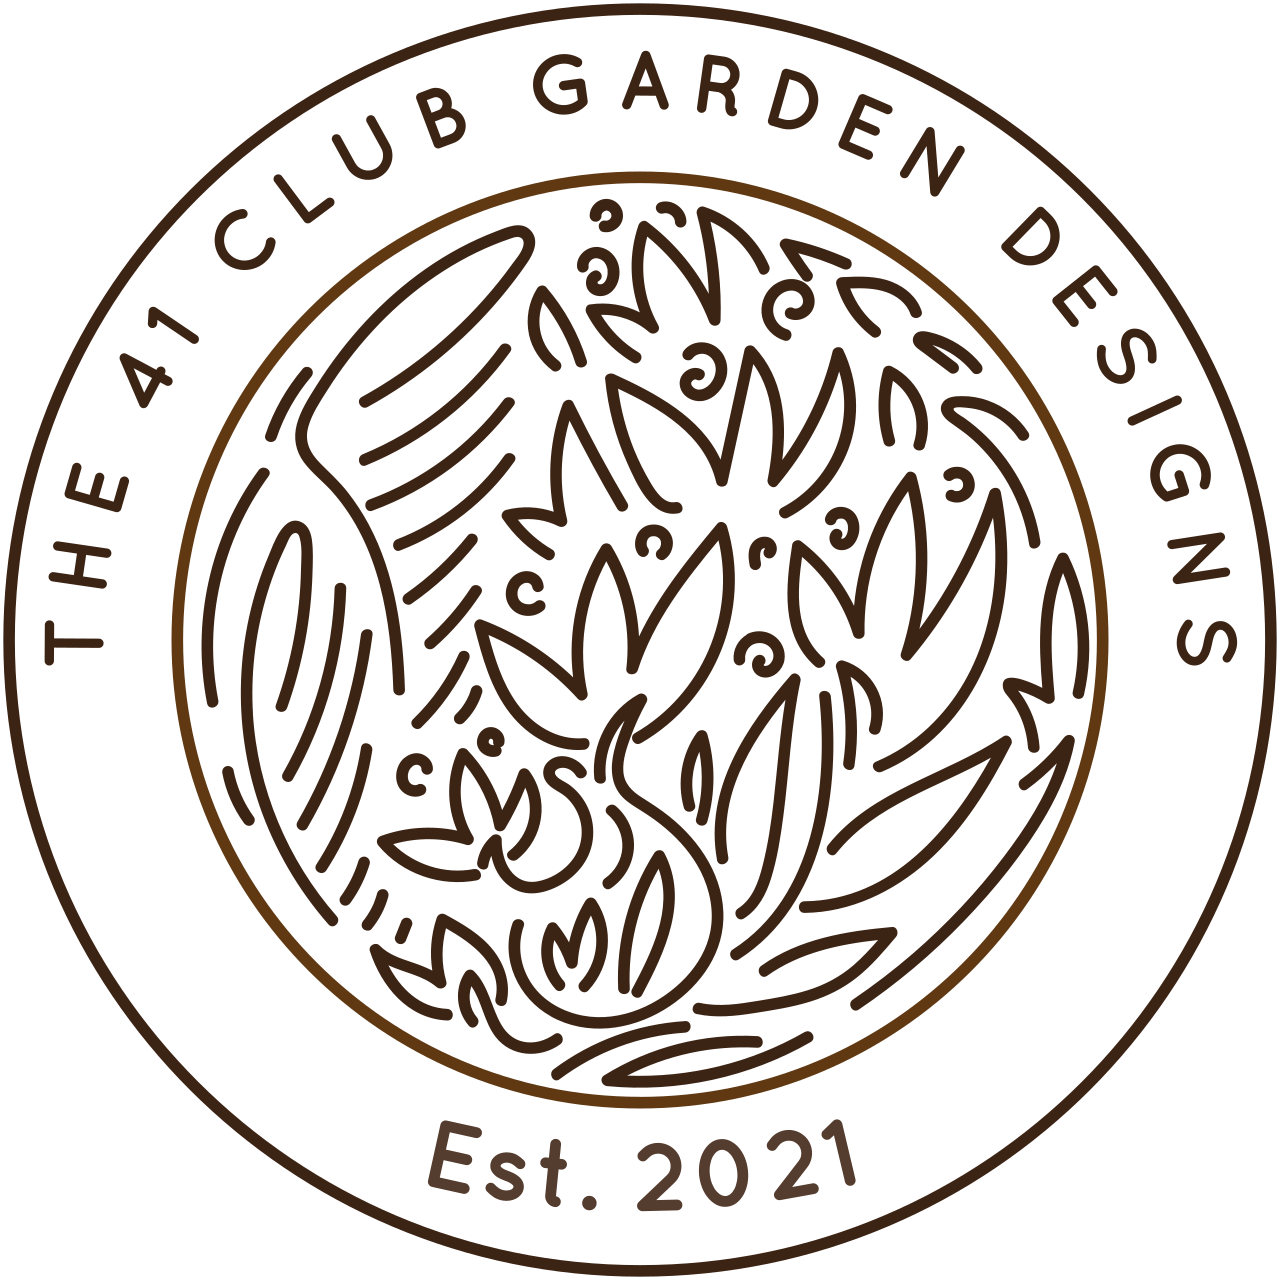 The 41 Club Gardens's web page